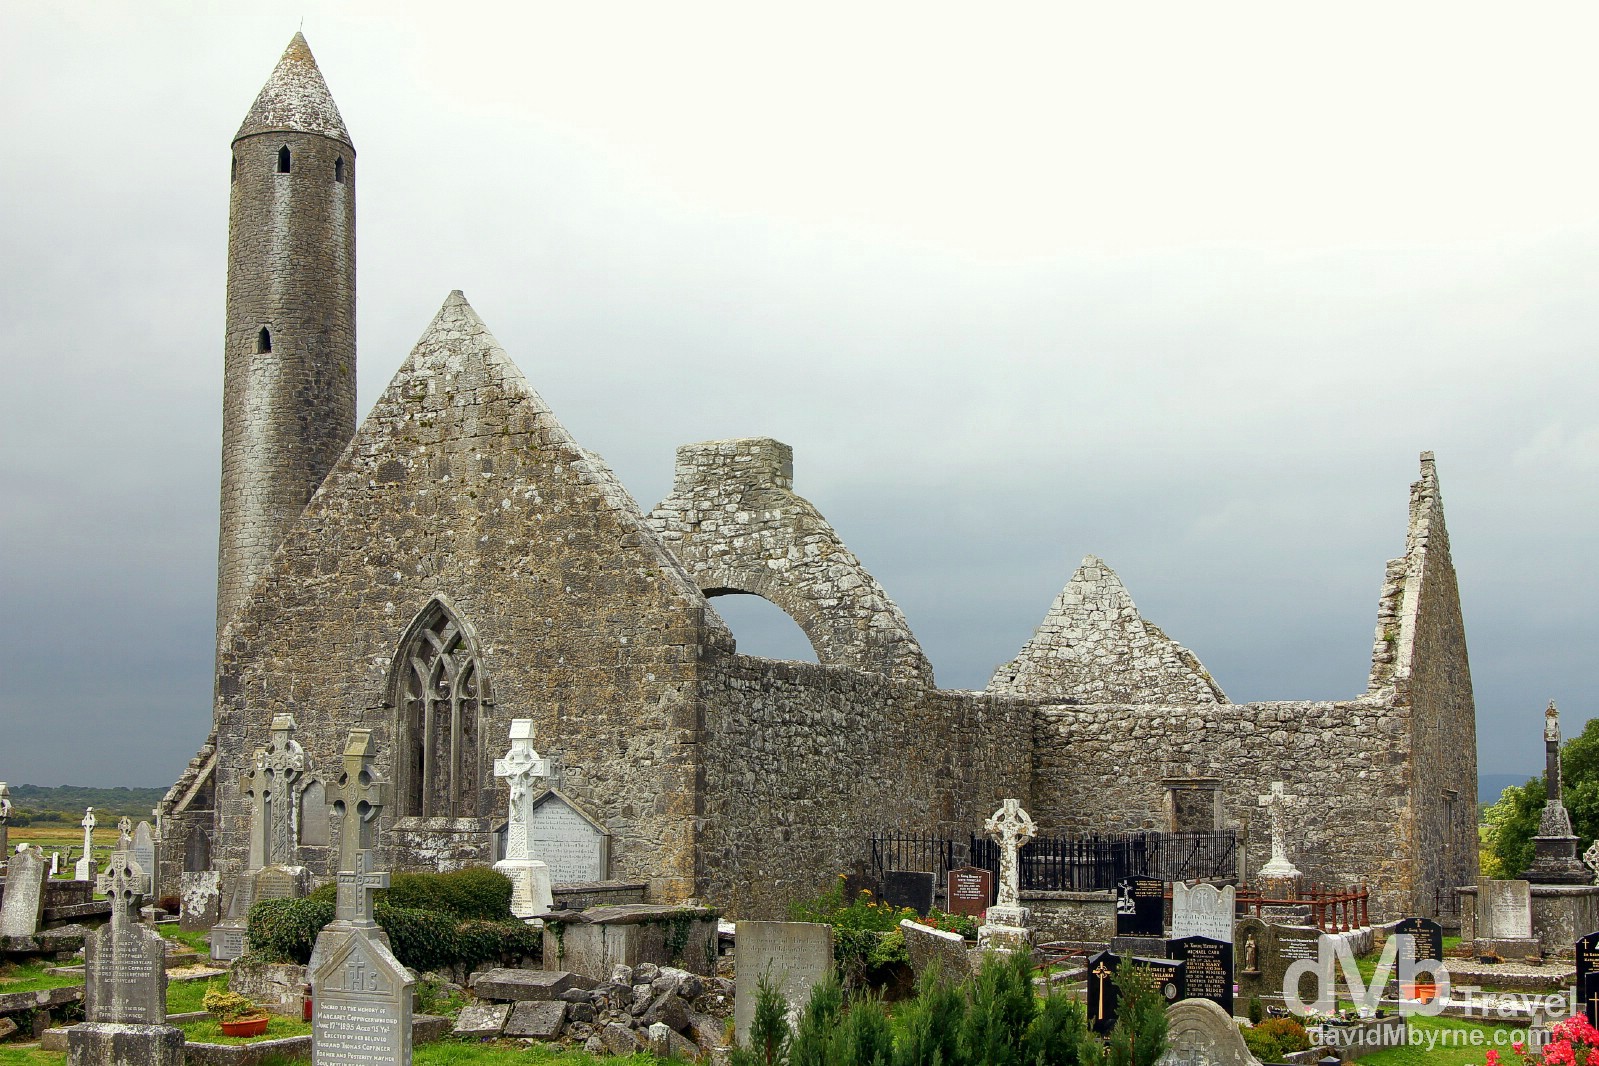 The remains of the early 7th century Kilmacduagh Monastery outside the village of Gort, Co. Galway, Ireland. August 27, 2014.